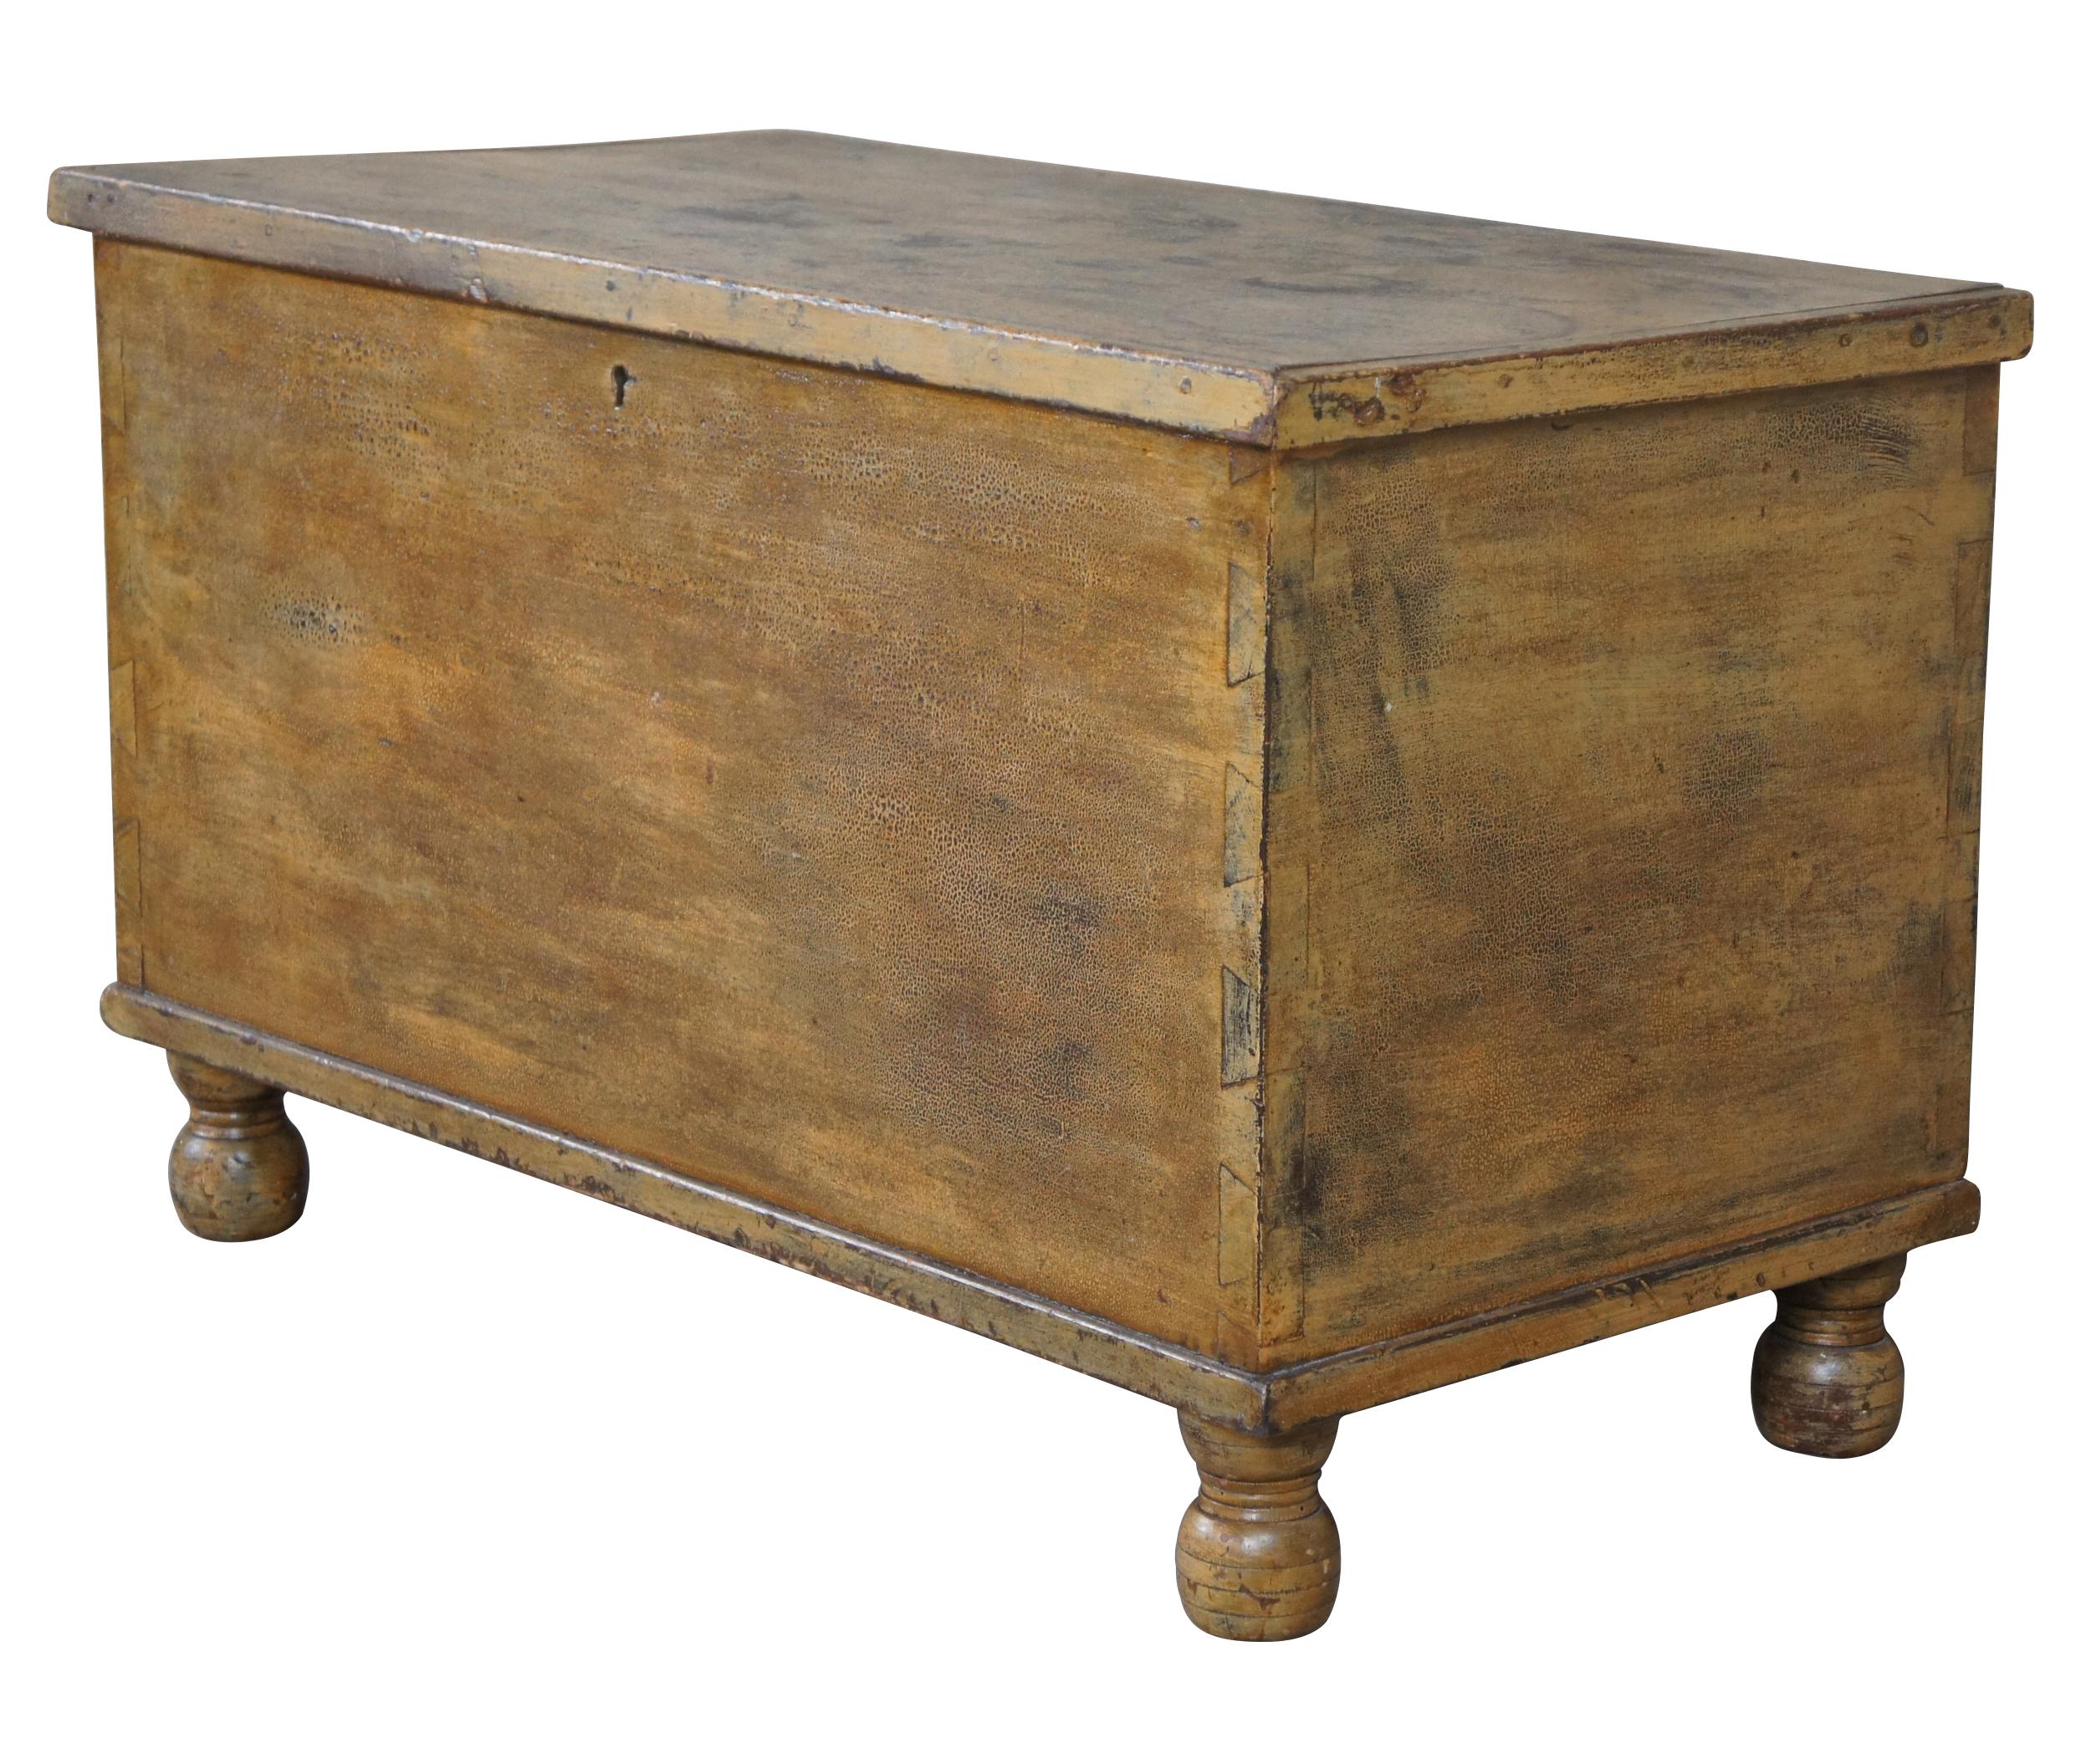 An antique Early American blanket storage chest, Pennsylvania circa 1820-40s. A rectangular form made from pine with a yellowish painted finish. Features a hand dovetailed case, interior compartment (ditty box) and hand turned bun feet. A charming